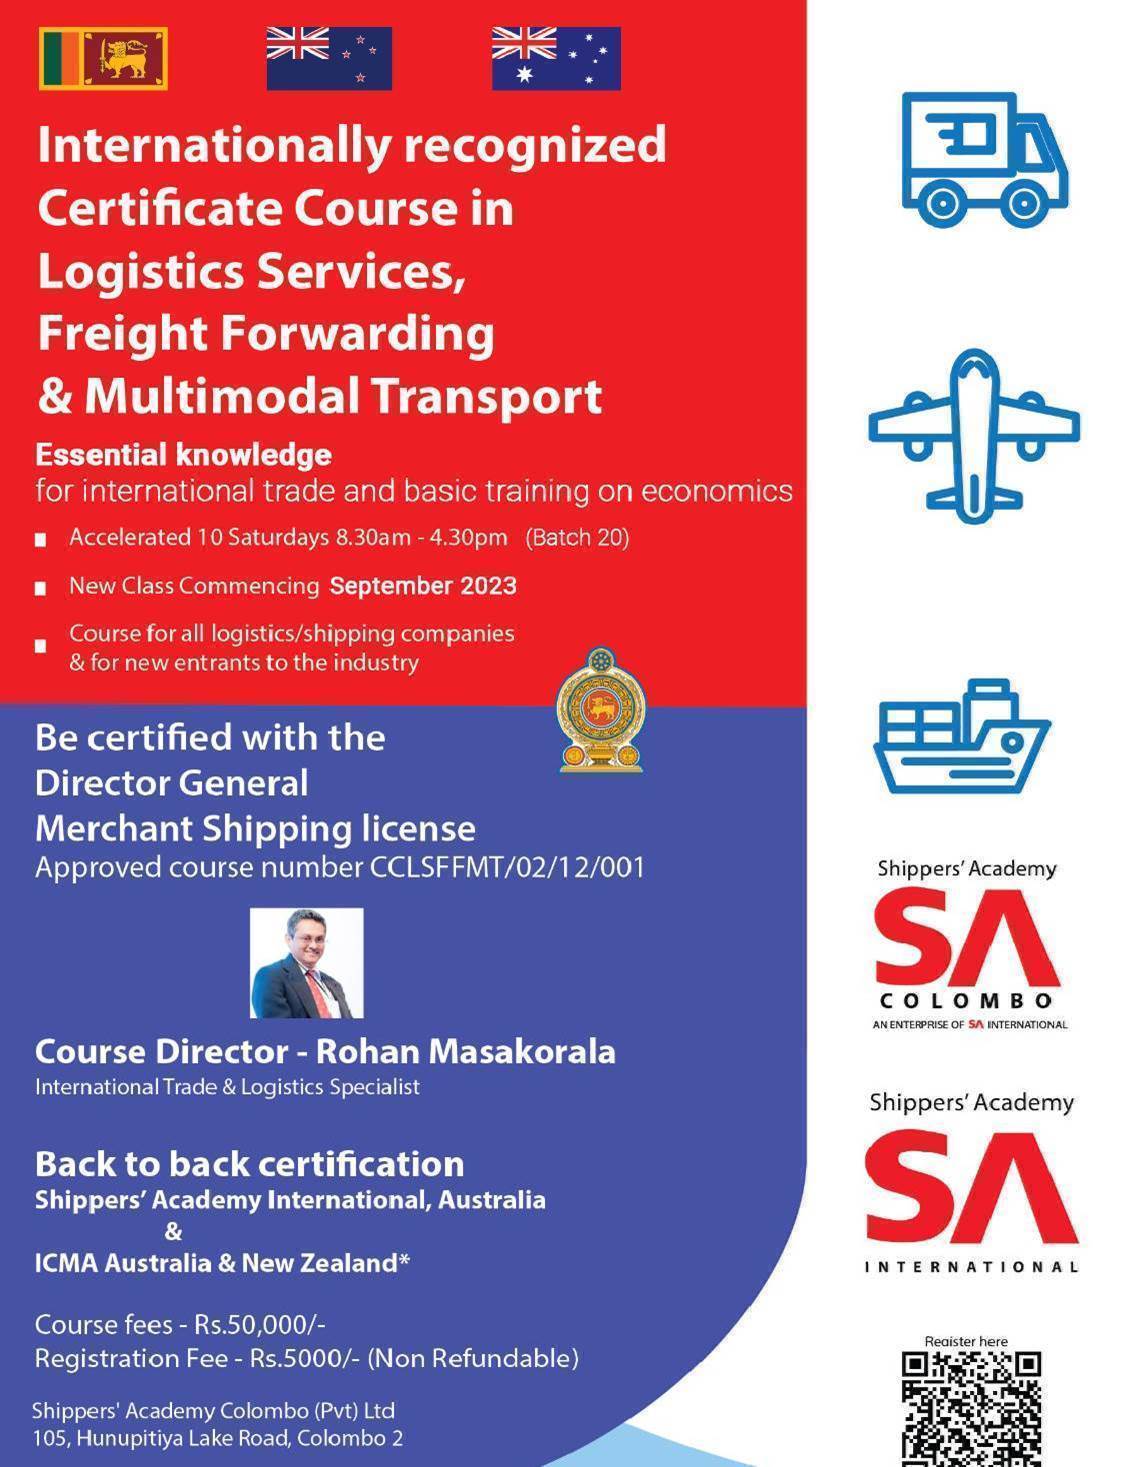 Certificate Course in Logistics Services, Freight Forwarding & Multimodal Transport